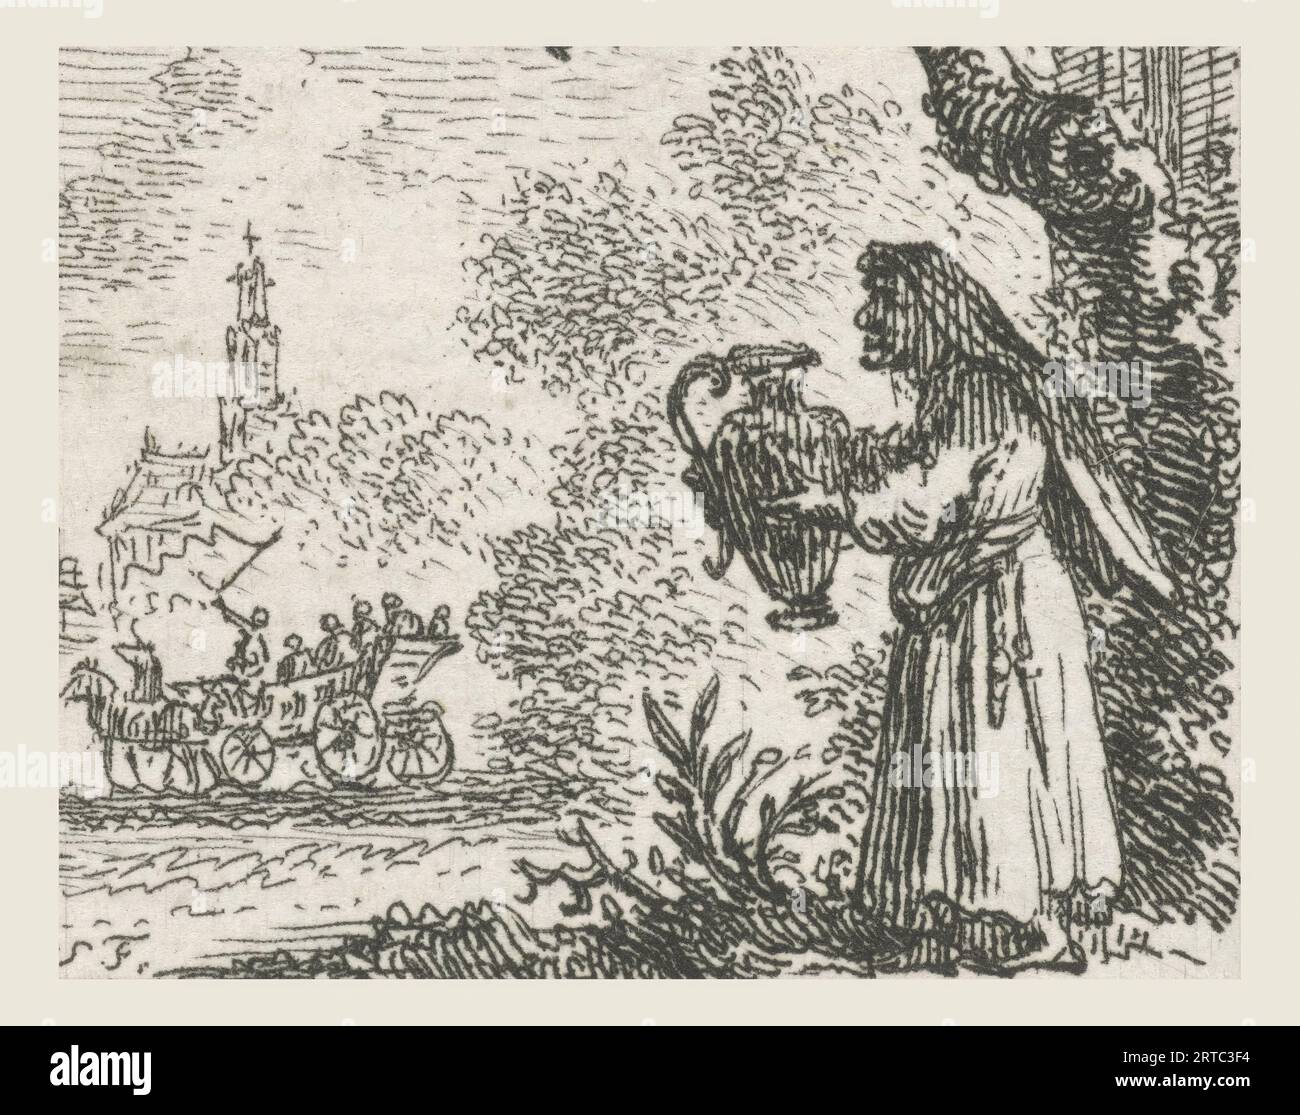 Fable of the old woman and the wine jug Illustrations for fable stories of Phaedrus (series title), An old woman stands under a tree and puts a jug of wine at her mouth. This illustration was made for the Aesopian fables of the Latin poet Phaedrus, Fables. Simon Fokke (1712-1784) was a Dutch designer, etcher, and engraver. Born in Amsterdam, The Netherlands. Discover the enchanting world of Phaedrus' fables, where timeless wisdom meets captivating storytelling. In 'The Fables of Phaedrus,' you'll embark on a journey through the vivid landscapes of ancient Rome Stock Photo